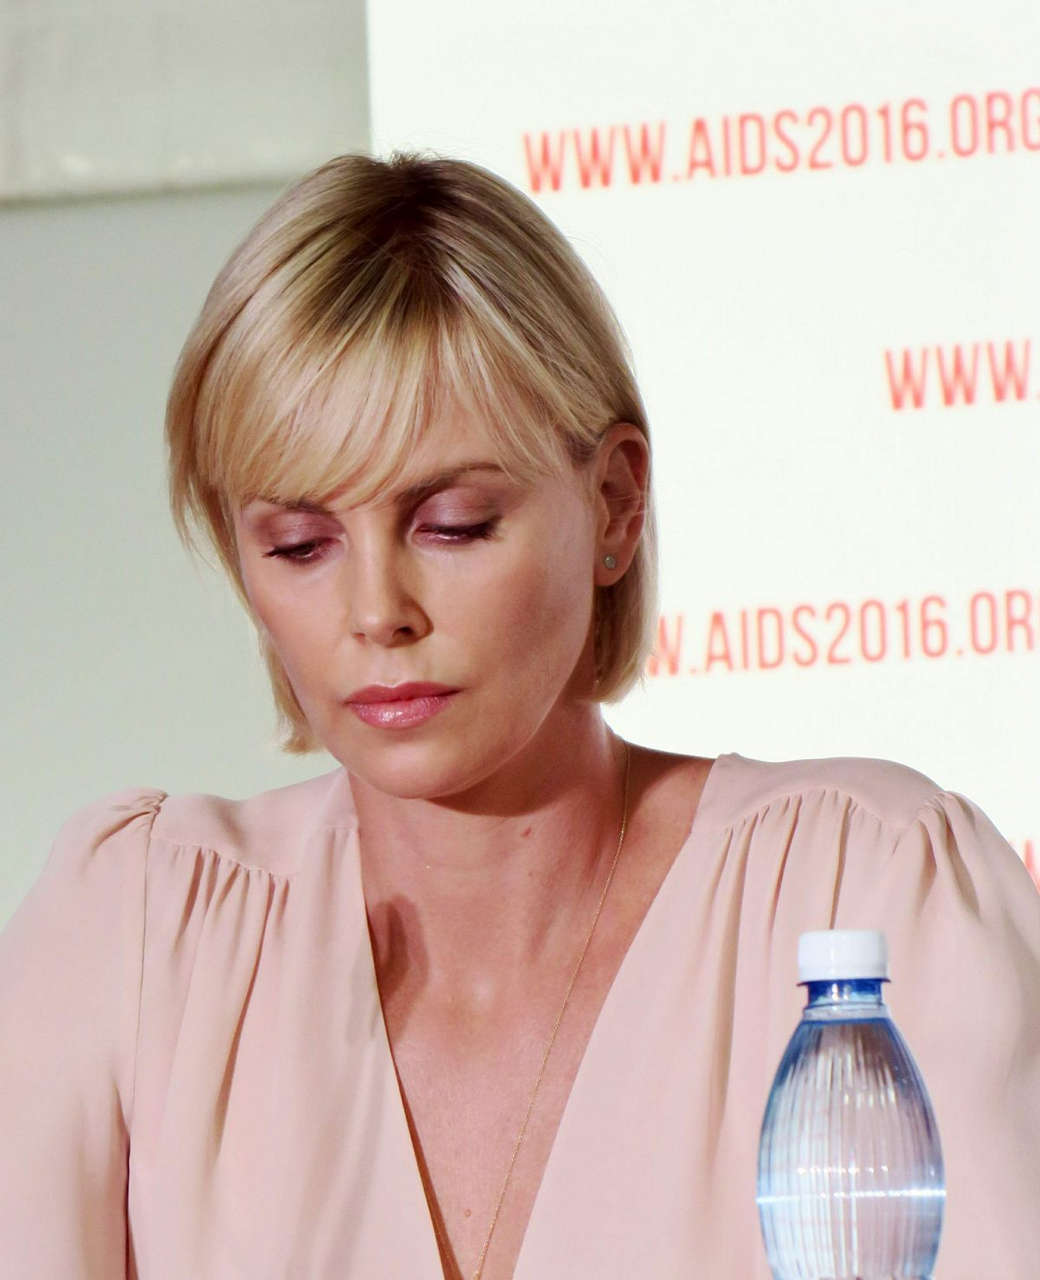 Charlize Theron Press Conference World Aids Conference Durban South Africa